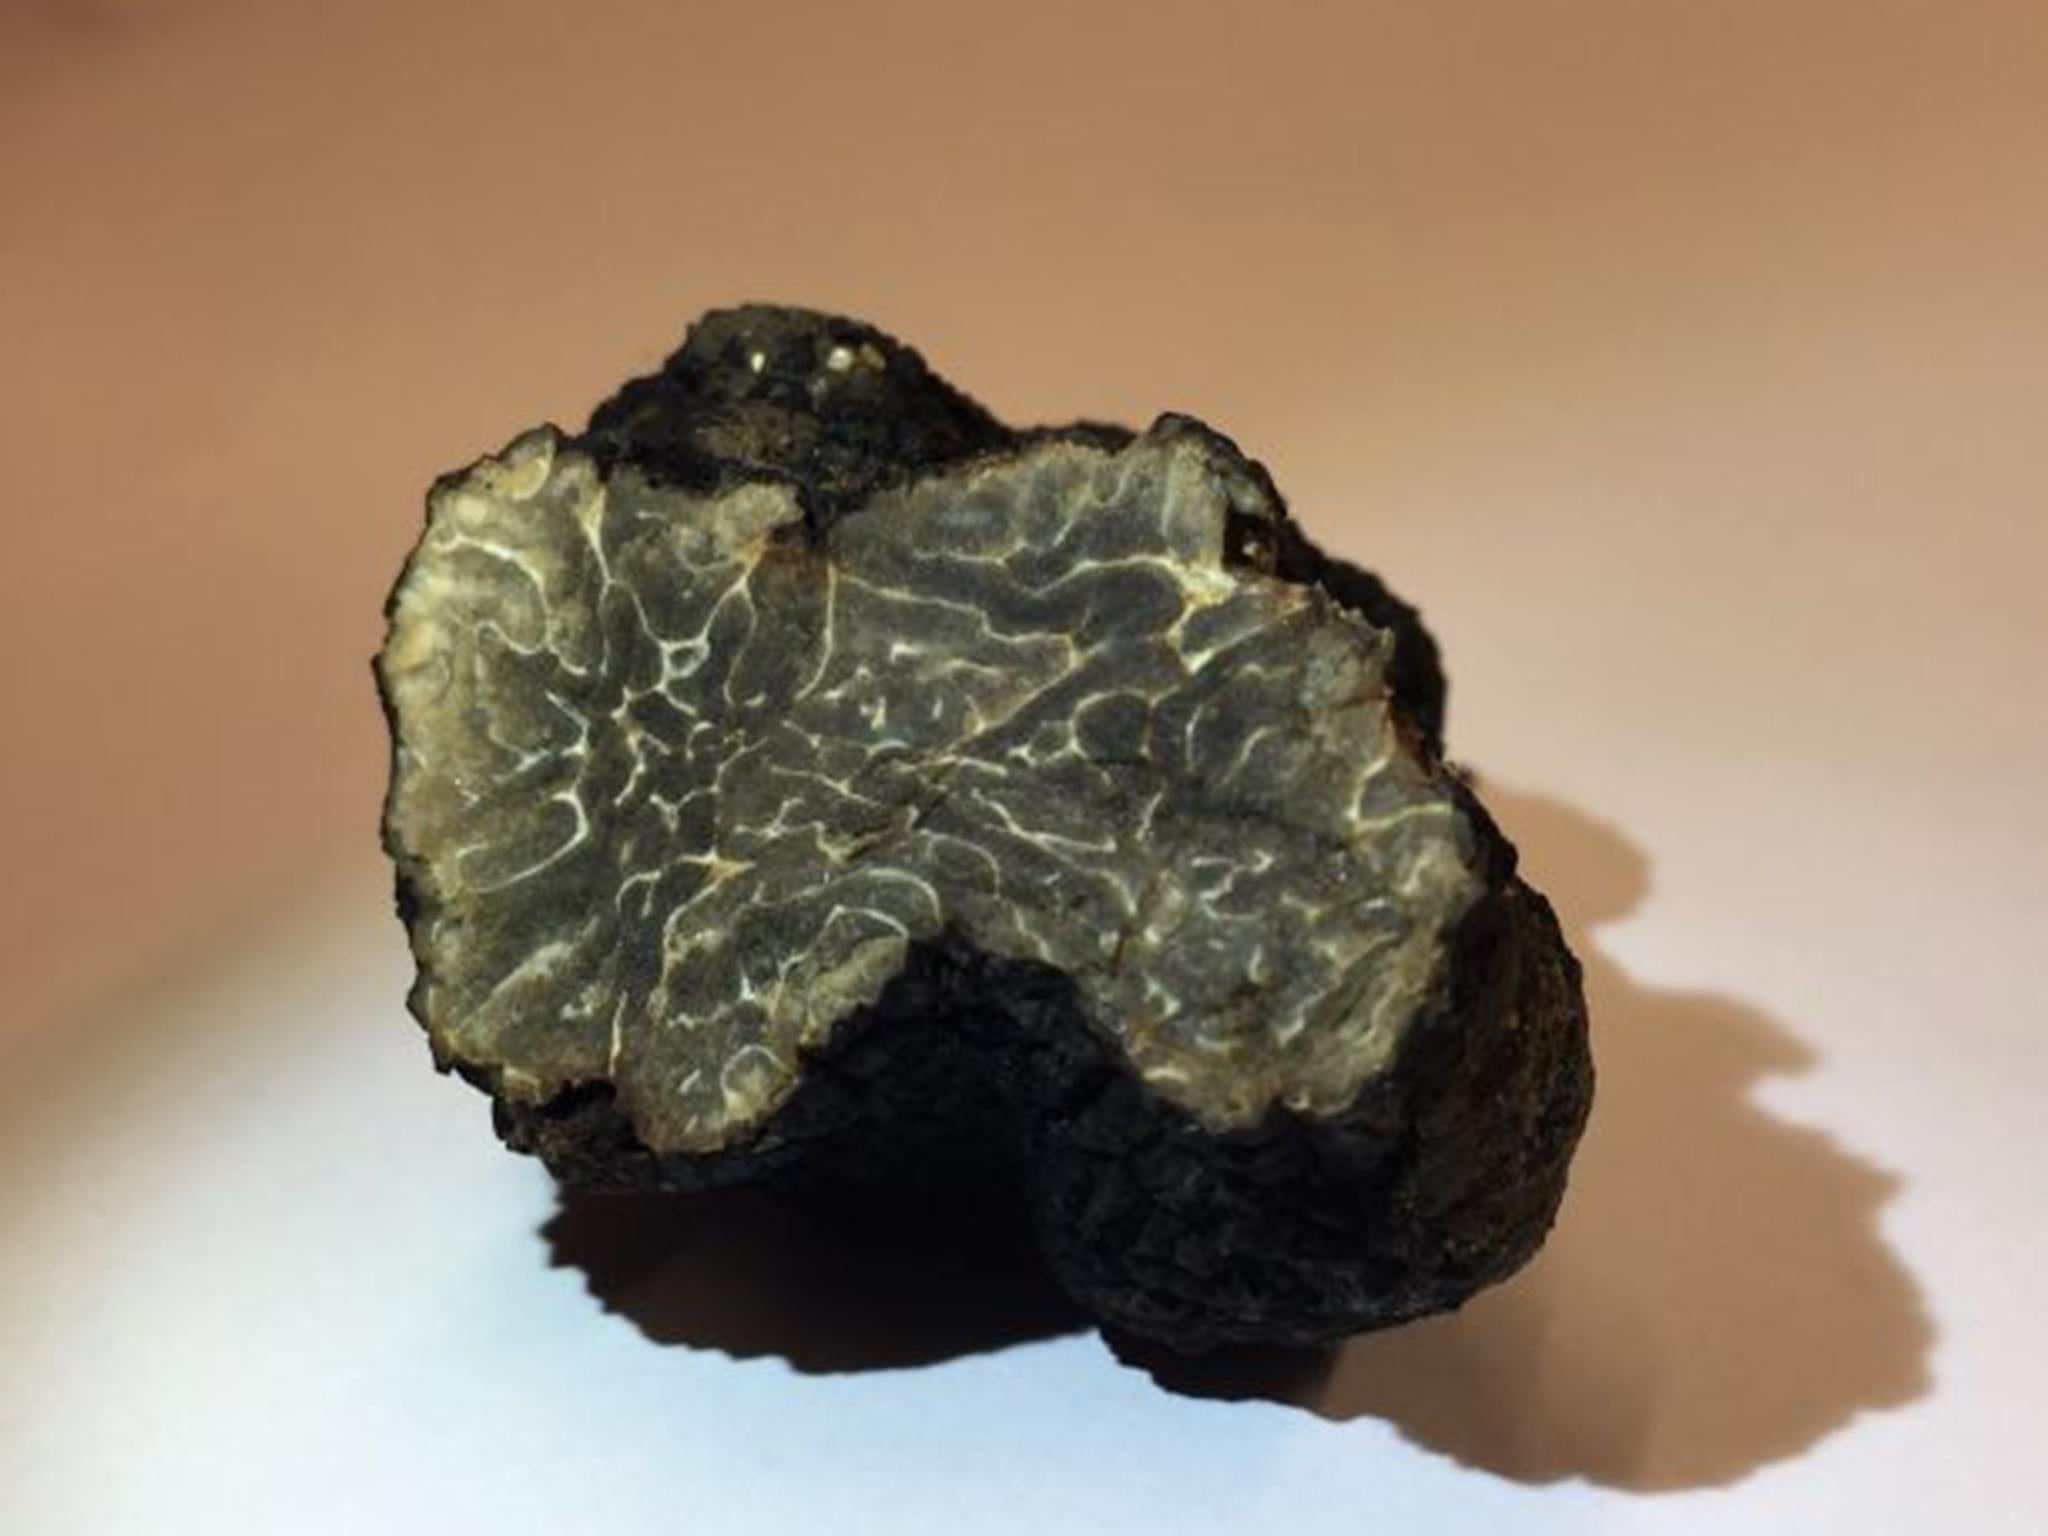 The winter black truffle was found on a rooftop in Paris